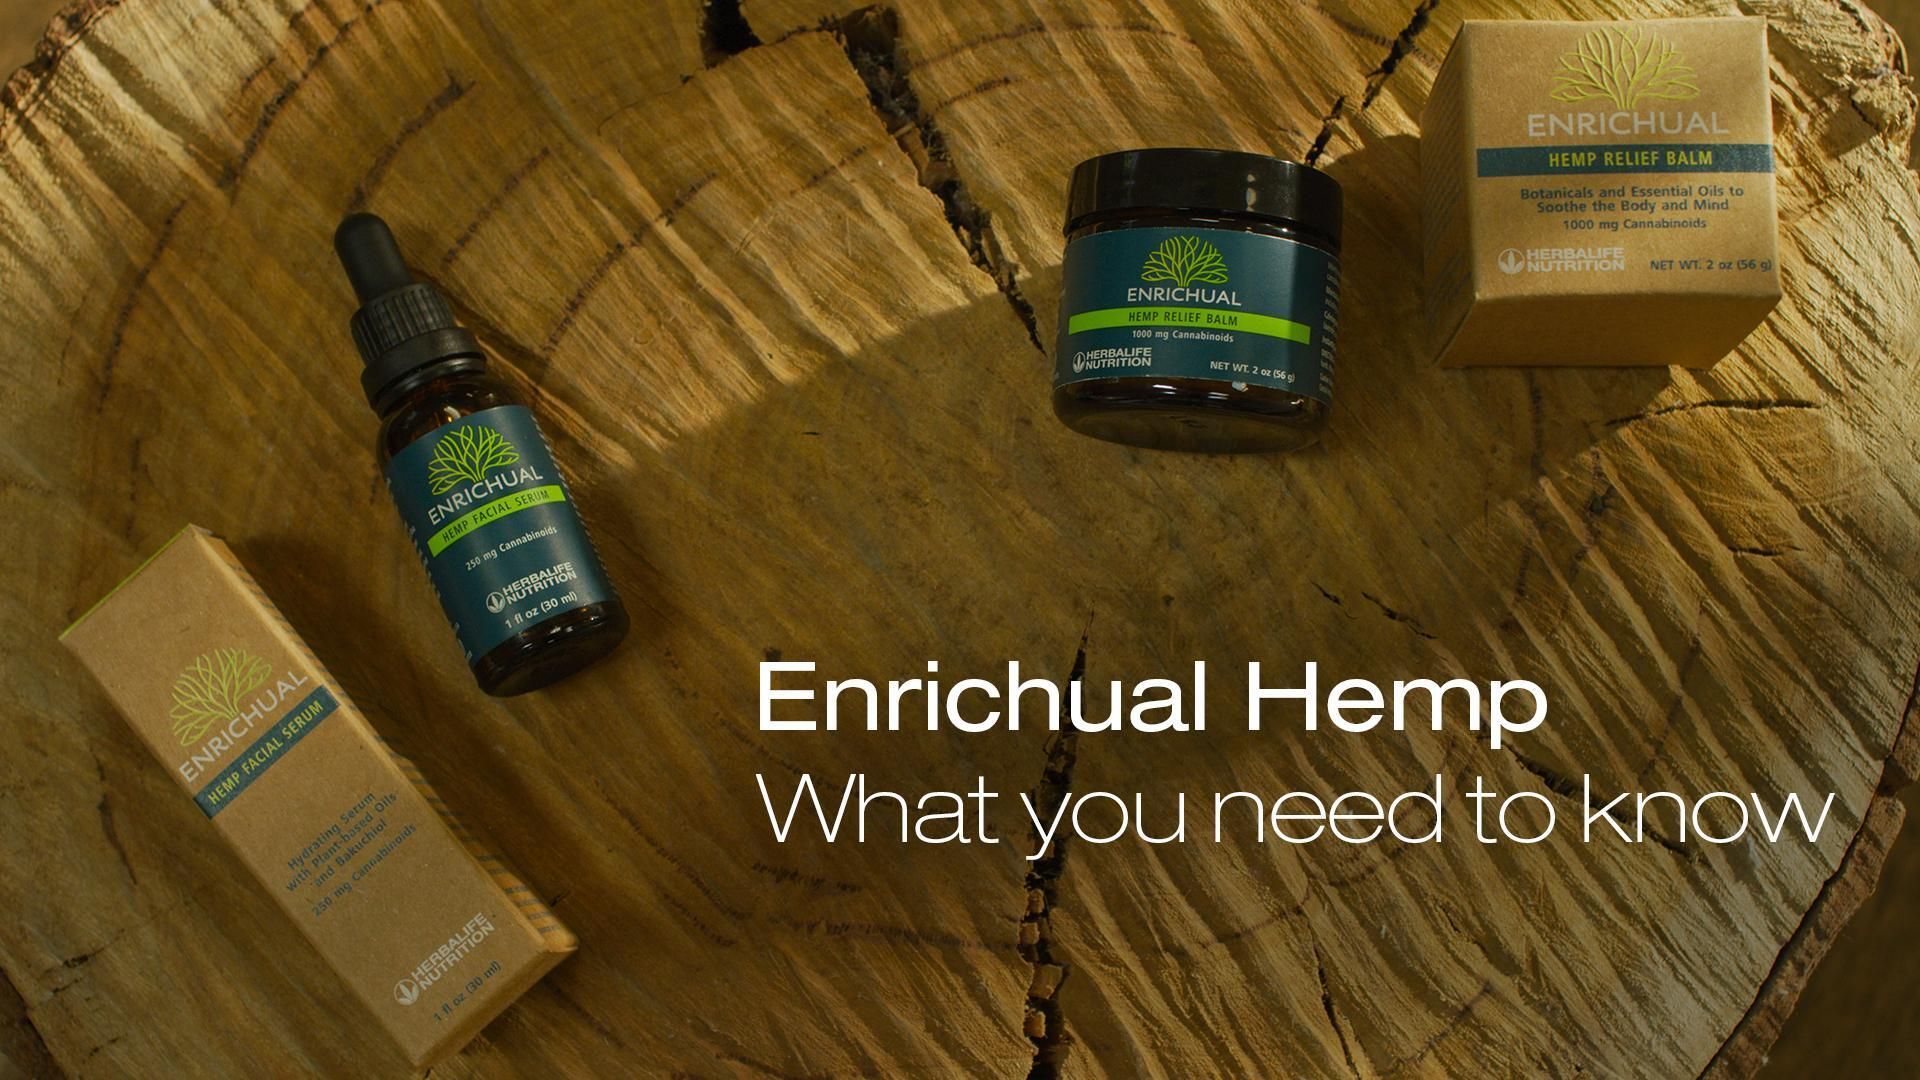 Enrichual Hemp: What you need to know